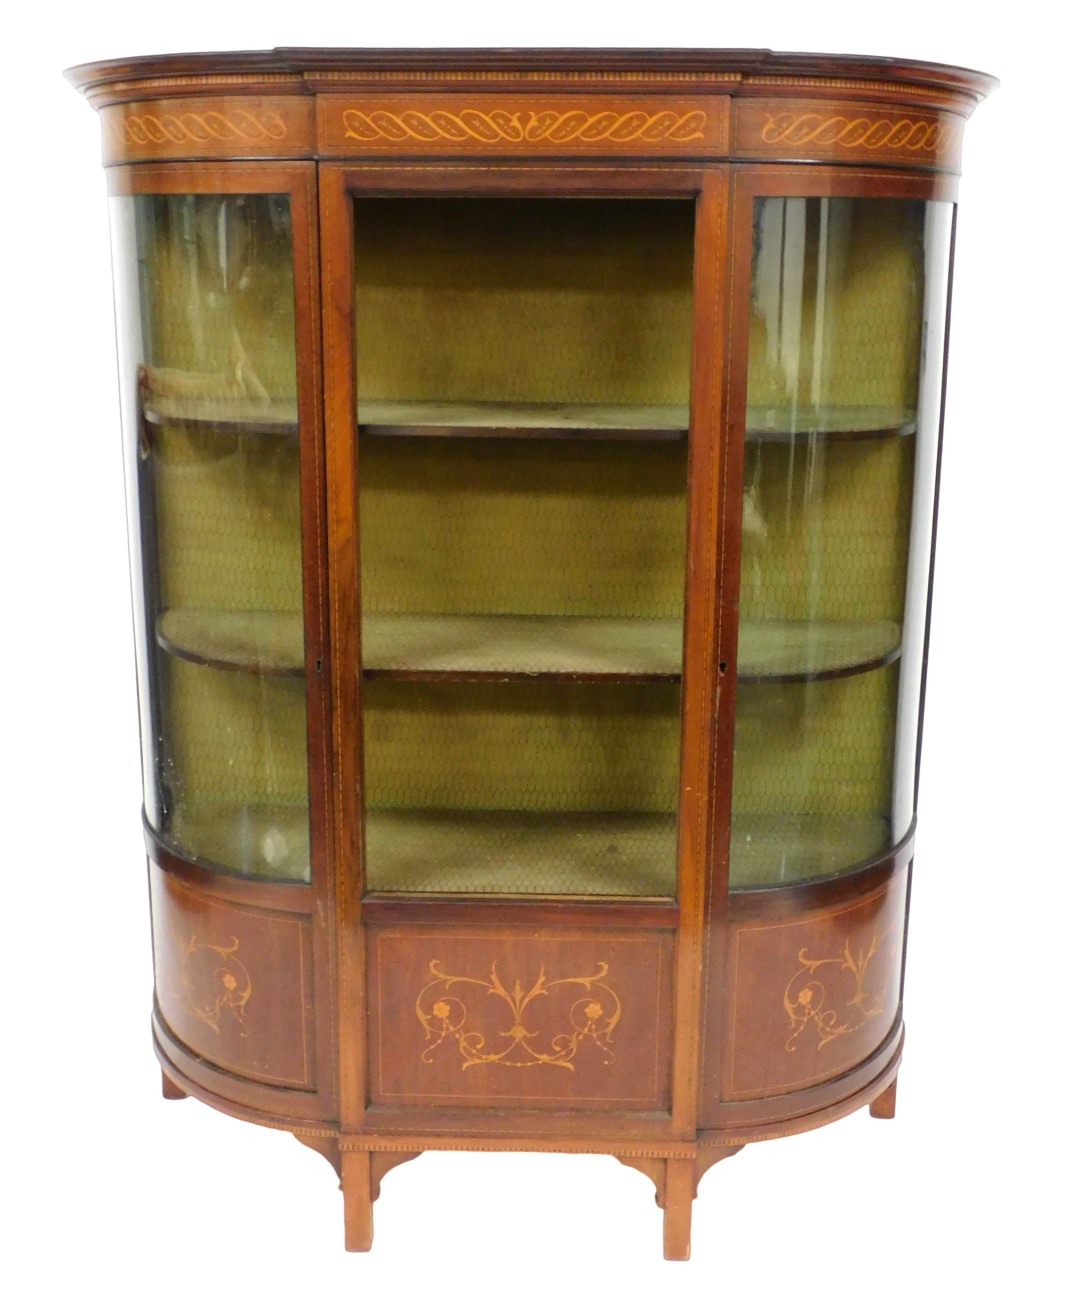 An Edwardian mahogany bow front display cabinet, with glazed sides and a door, glass lacking, above